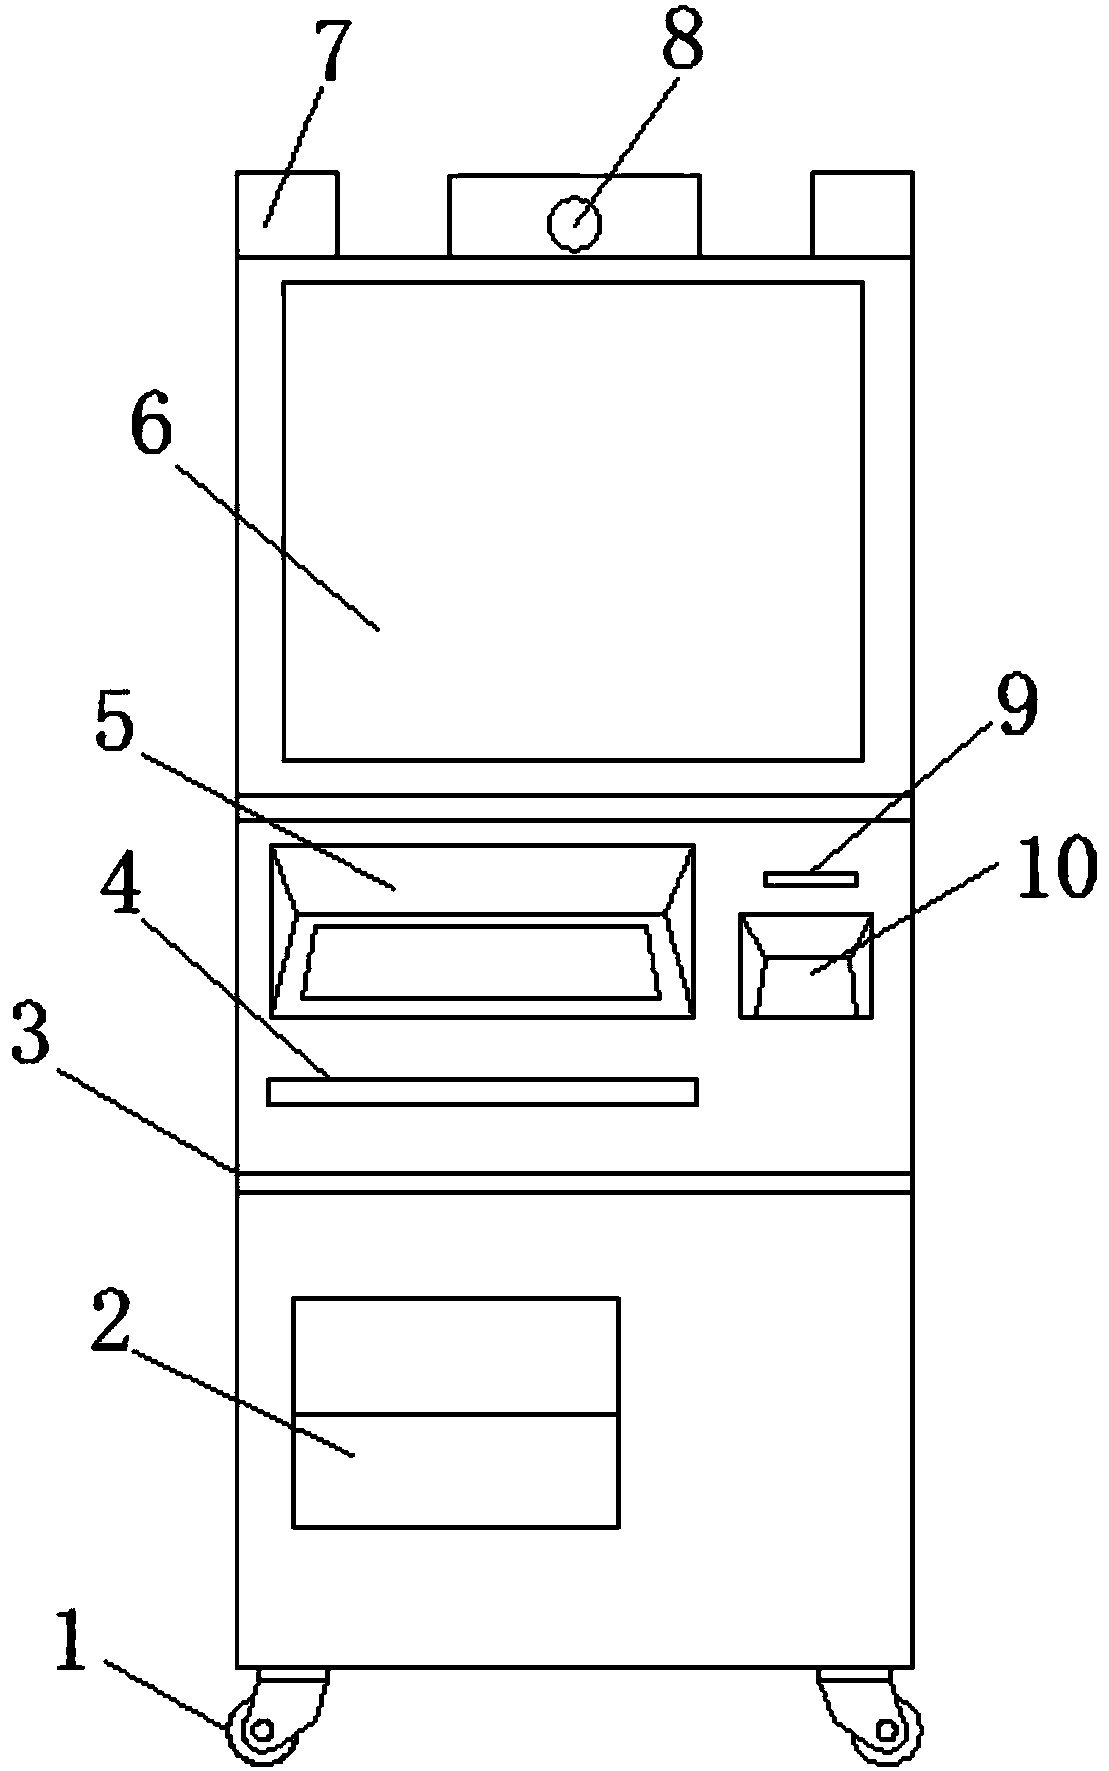 Rapid medical image processing device